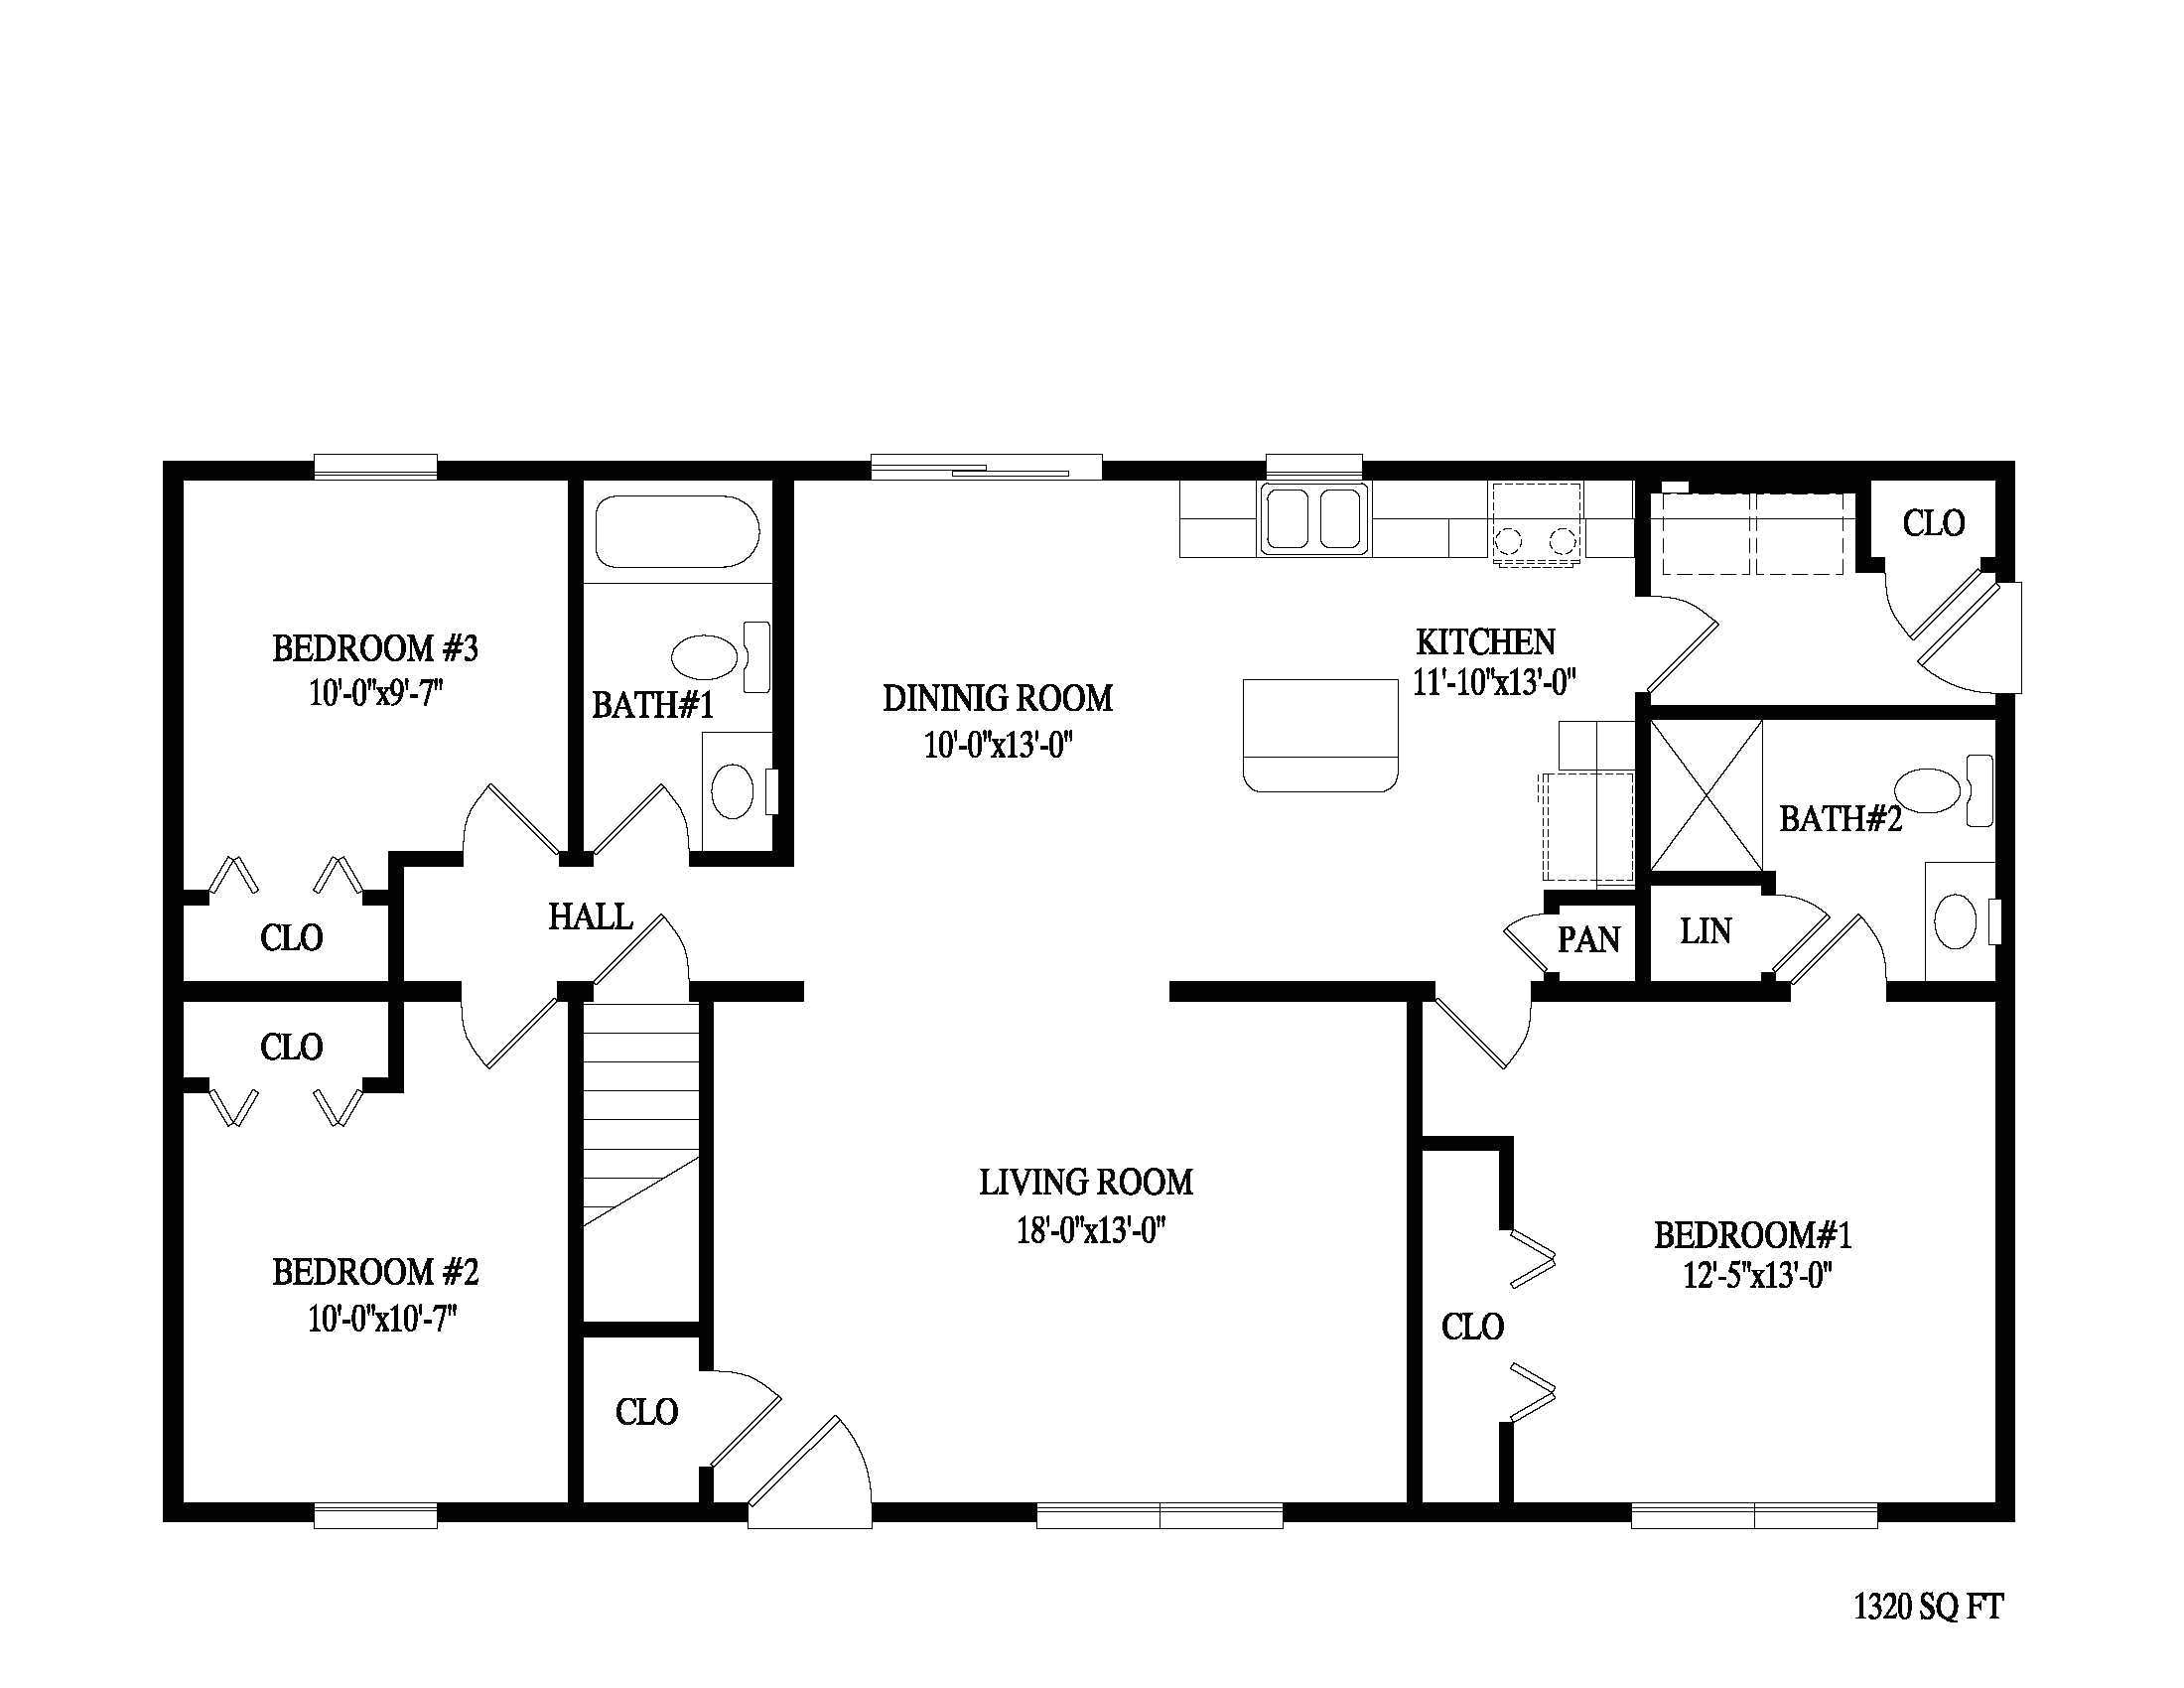 fascinating 2 bedroom ranch floor plans ideas including split three two bath gallery with style house plan beds baths pictures